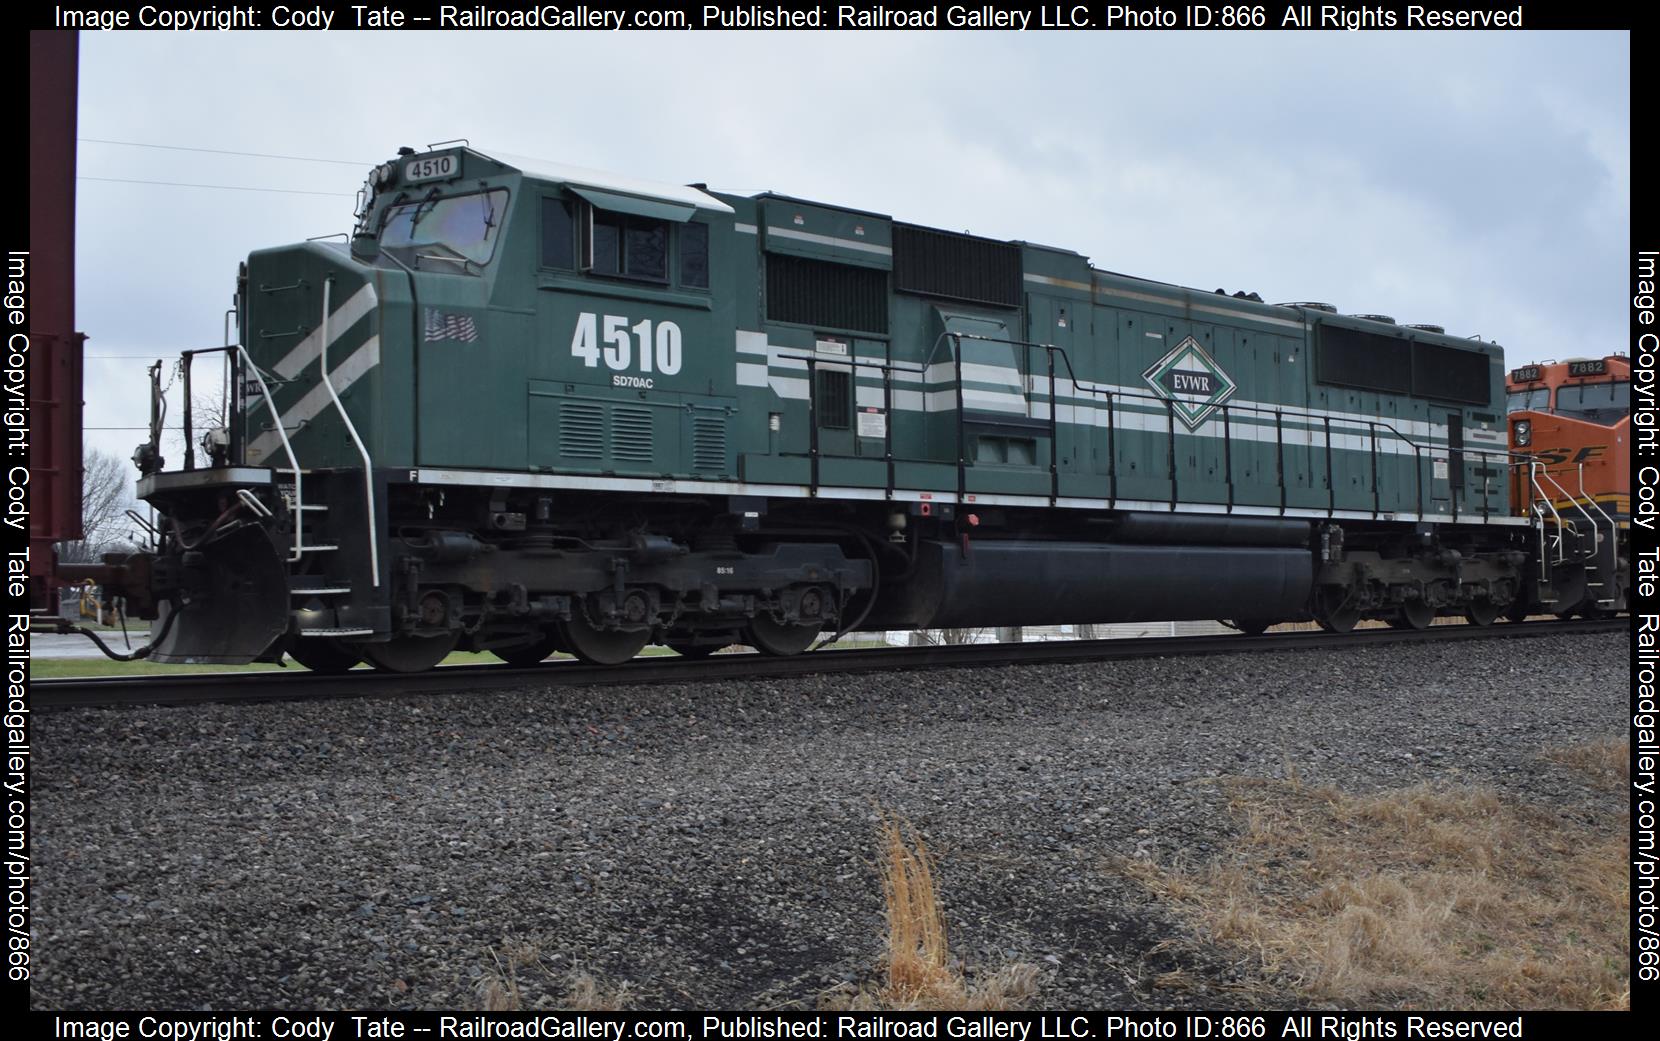 EVWR 4510 is a class SD70AC and  is pictured in Centralia, Illinois, USA.  This was taken along the Beardstown subdivision  on the Evansville Western Railway. Photo Copyright: Cody  Tate uploaded to Railroad Gallery on 03/21/2023. This photograph of EVWR 4510 was taken on Tuesday, March 21, 2023. All Rights Reserved. 